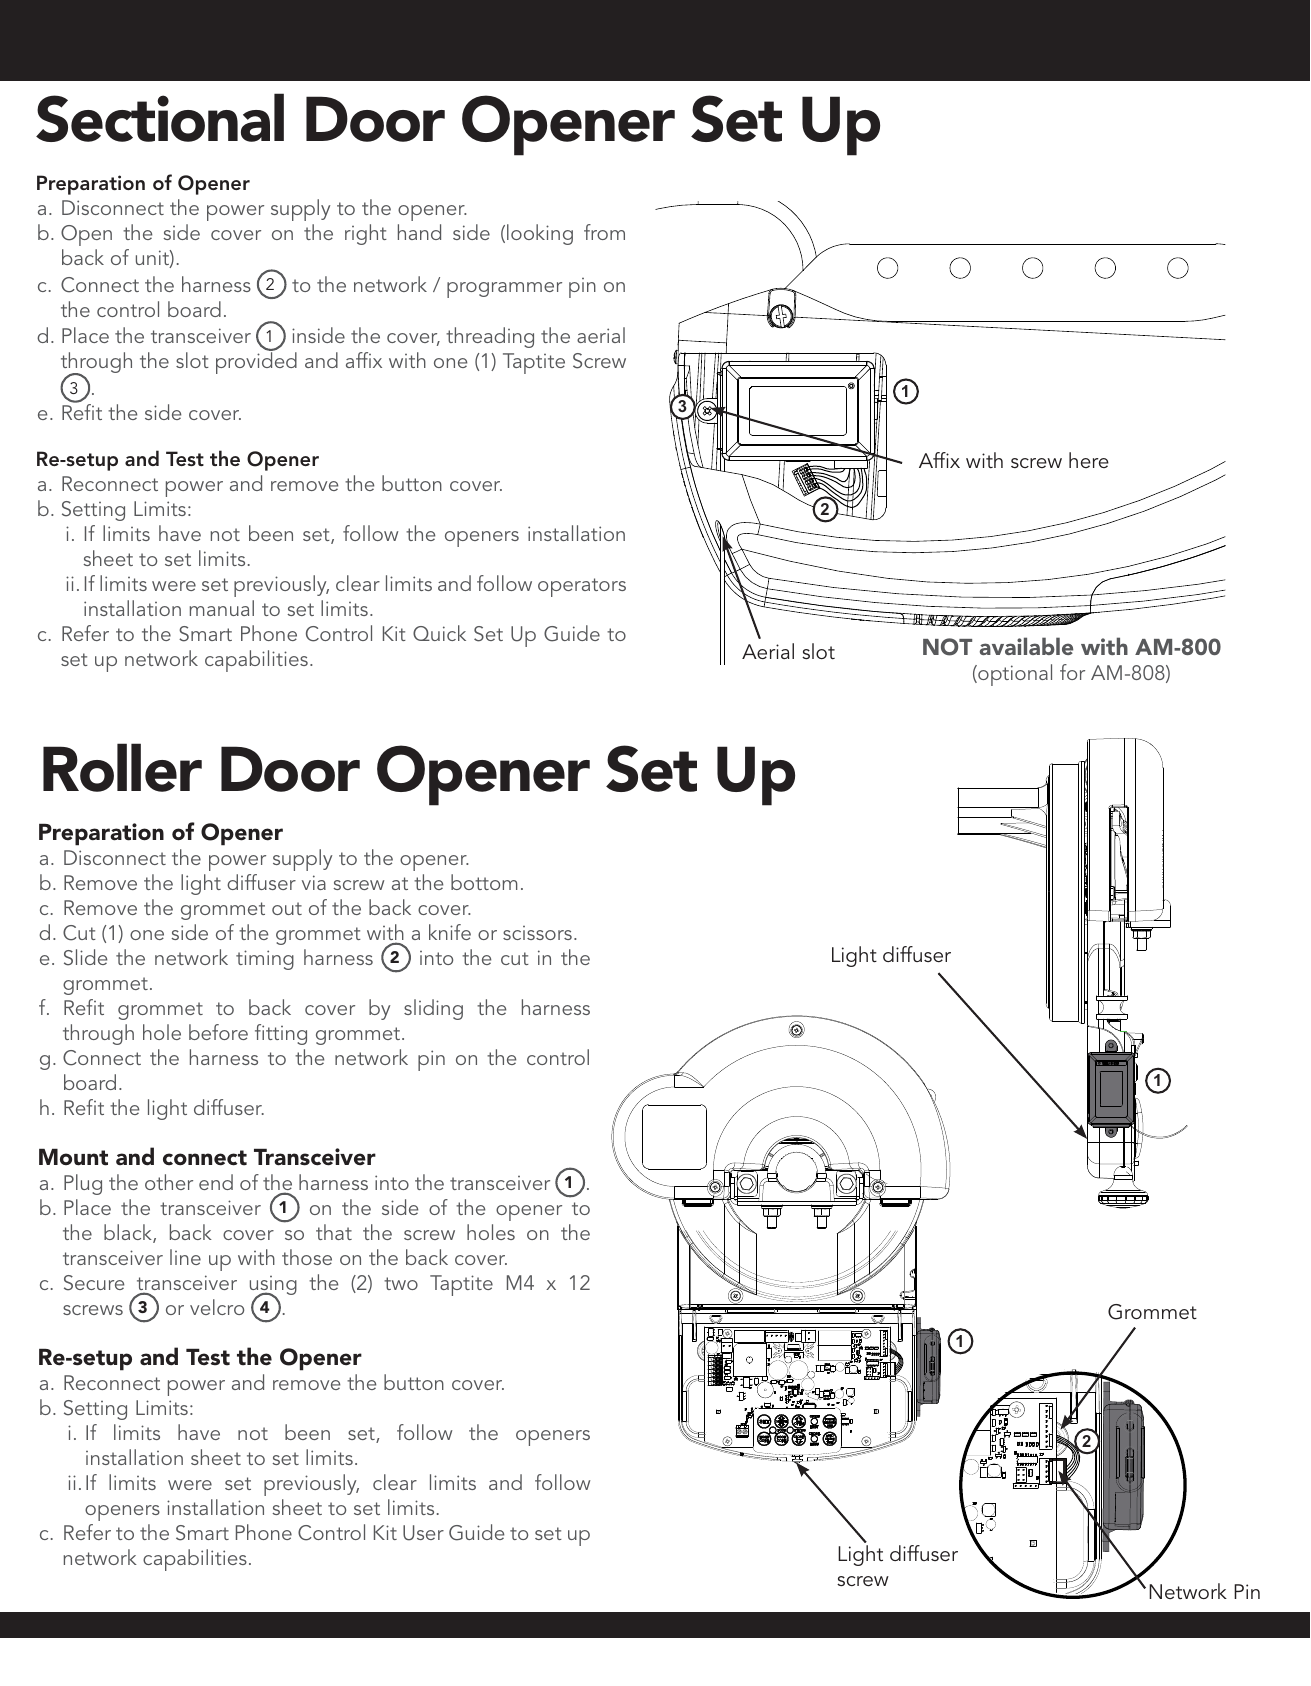 Roller Door Opener Set UpPreparation of Opener a. Disconnect the power supply to the opener.b. Remove the light diffuser via screw at the bottom.c. Remove the grommet out of the back cover.d. Cut (1) one side of the grommet with a knife or scissors.e. Slide the network timing harness 2 into the cut in the grommet.f.  Refit grommet to back cover by sliding the harness through hole before fitting grommet.g. Connect the harness to the network pin on the control board.h. Refit the light diffuser.Mount and connect Transceivera. Plug the other end of the harness into the transceiver 1.b. Place the transceiver  1 on the side of the opener to the black, back cover so that the screw holes on the transceiver line up with those on the back cover.c. Secure transceiver using the (2) two Taptite M4 x 12 screws  3 or velcro  4.Re-setup and Test the Openera. Reconnect power and remove the button cover.b. Setting Limits:i. If limits have not been set, follow the openers installation sheet to set limits. ii. If limits were set previously, clear limits and follow openers installation sheet to set limits.c. Refer to the Smart Phone Control Kit User Guide to set up network capabilities.211Network PinLight diffuserGrommetLight diffuser  screwAerial slotAffix with screw herePreparation of Opener a. Disconnect the power supply to the opener.b. Open the side cover on the right hand side (looking from back of unit).c. Connect the harness  2 to the network / programmer pin on the control board.d. Place the transceiver  1 inside the cover, threading the aerial through the slot provided and affix with one (1) Taptite Screw 3.e. Refit the side cover.Re-setup and Test the Openera. Reconnect power and remove the button cover.b. Setting Limits:i. If limits have not been set, follow the openers installation sheet to set limits. ii. If limits were set previously, clear limits and follow operators installation manual to set limits.c. Refer to the Smart Phone Control Kit Quick Set Up Guide to set up network capabilities.132NOT available with AM-800 (optional for AM-808)Sectional Door Opener Set Up